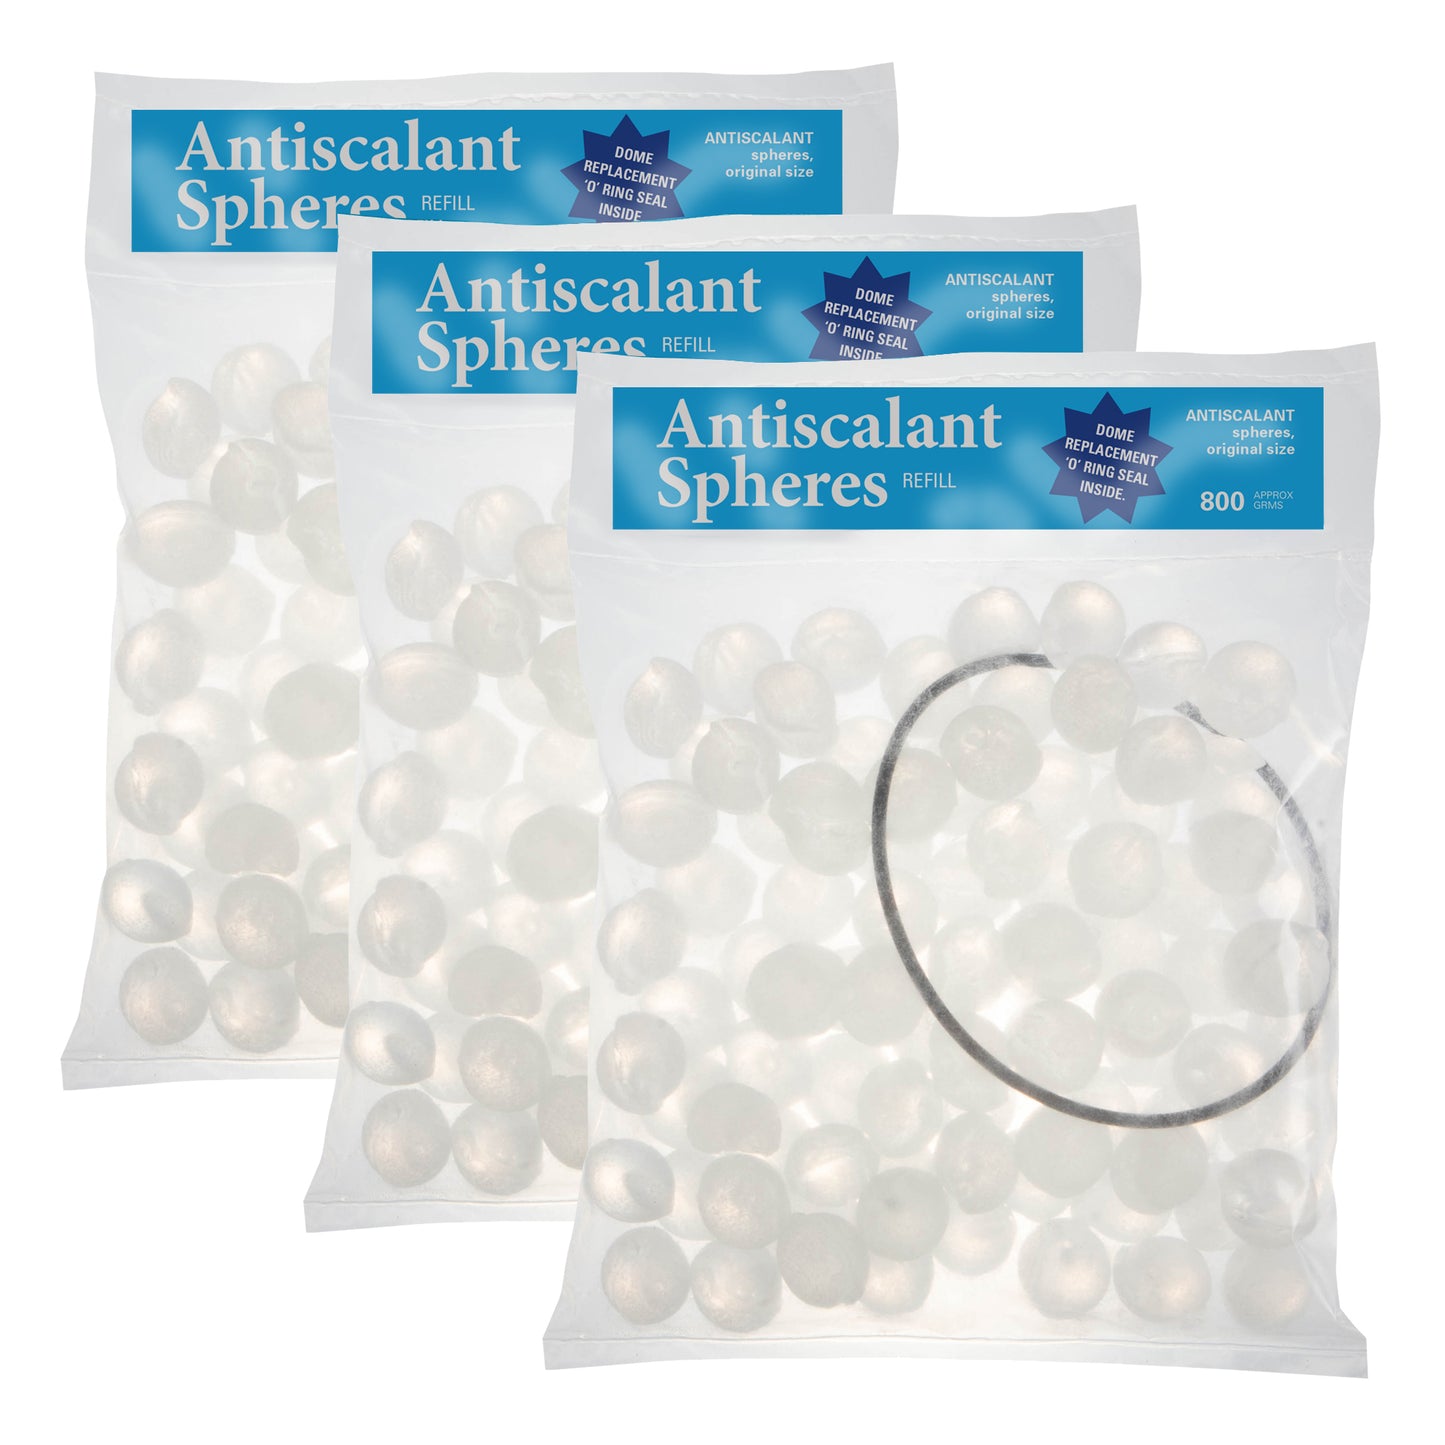 3 x Antiscalant Spheres (Siliphos) Refill Pack 800g